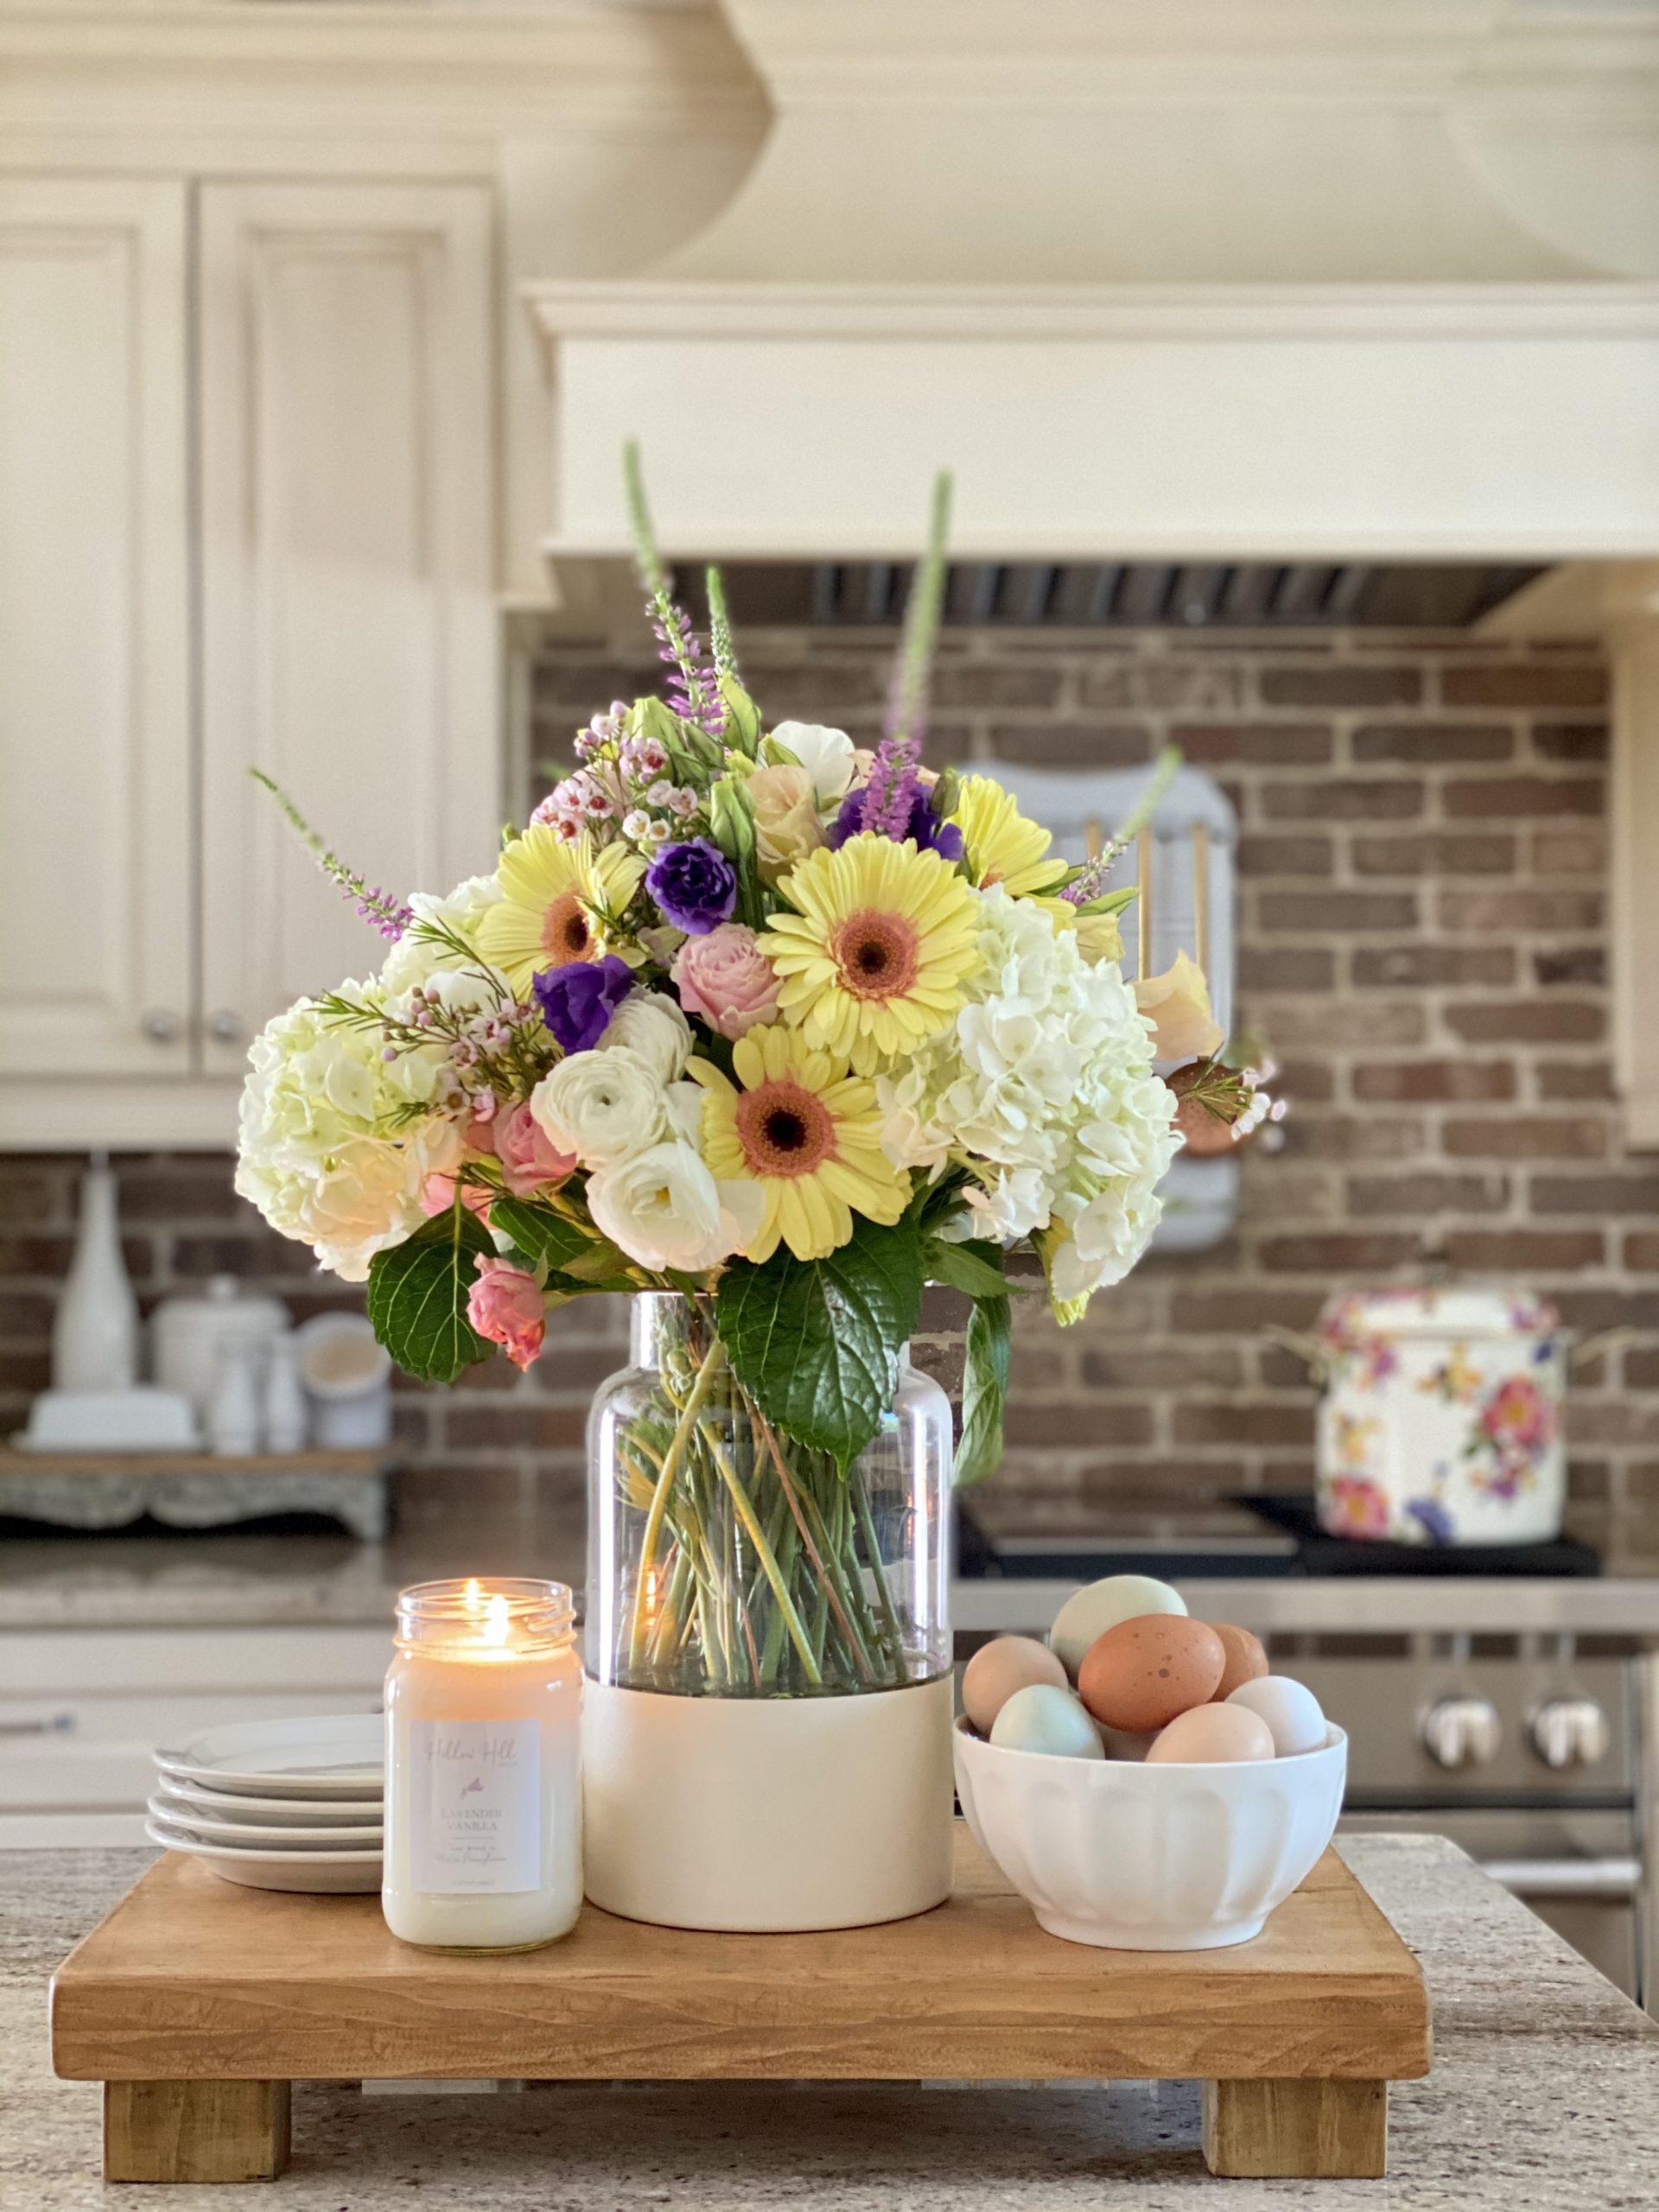 DIY color block vase on the kitchen island with a Spring floral arrangement. It is on a riser with a candle and farm fresh eggs in a white bowl.